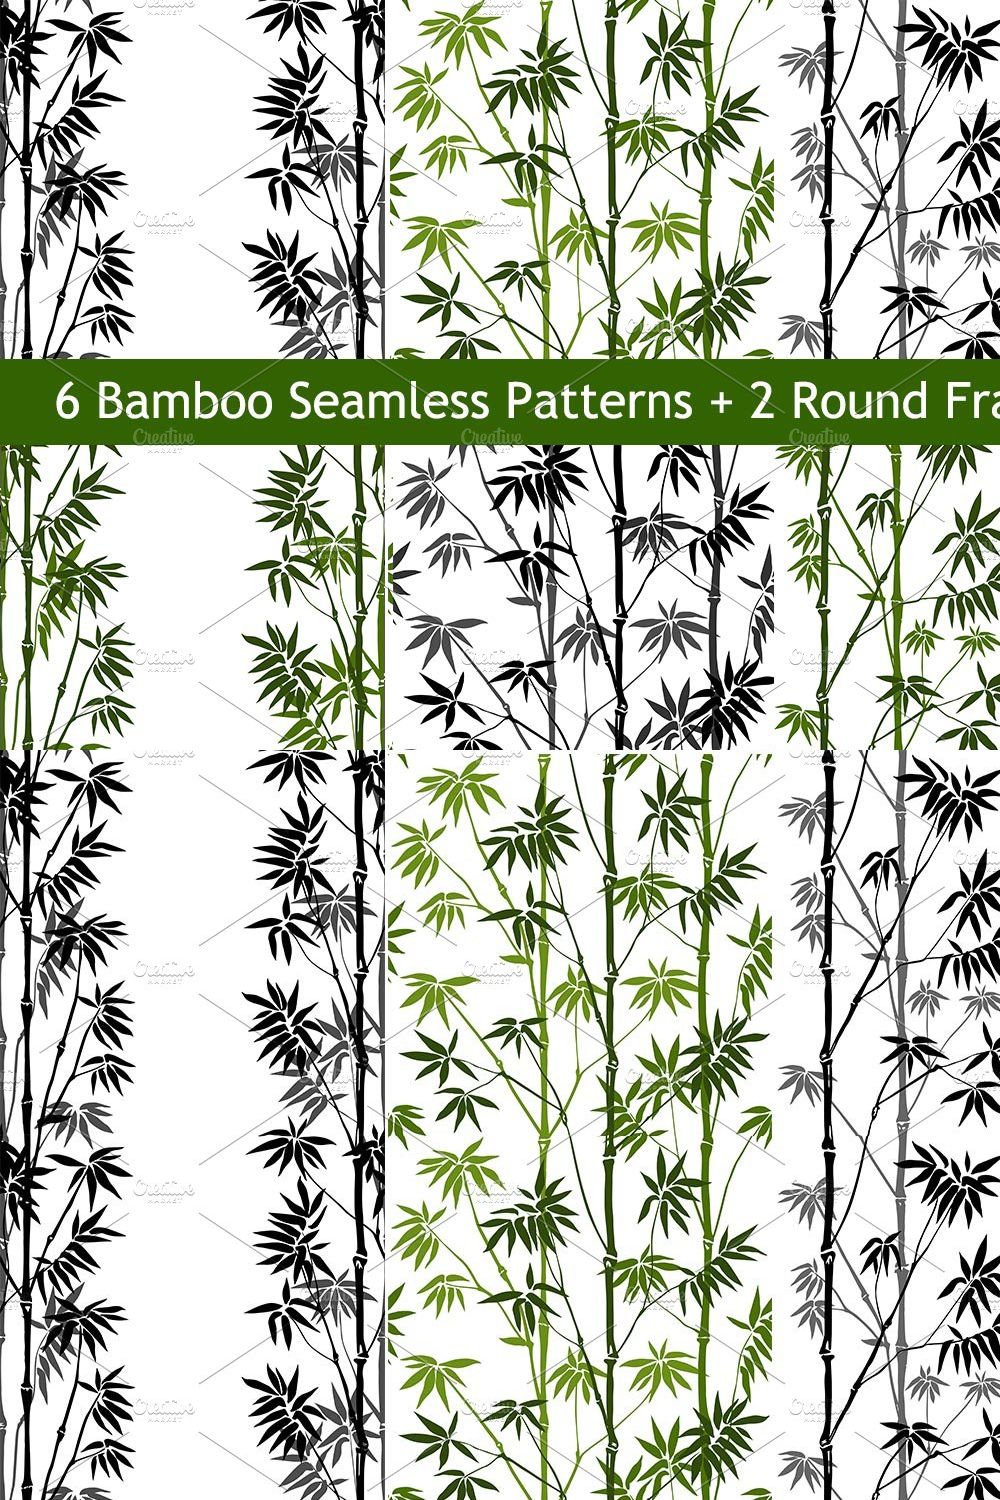 Bamboo Seamless Patterns pinterest preview image.